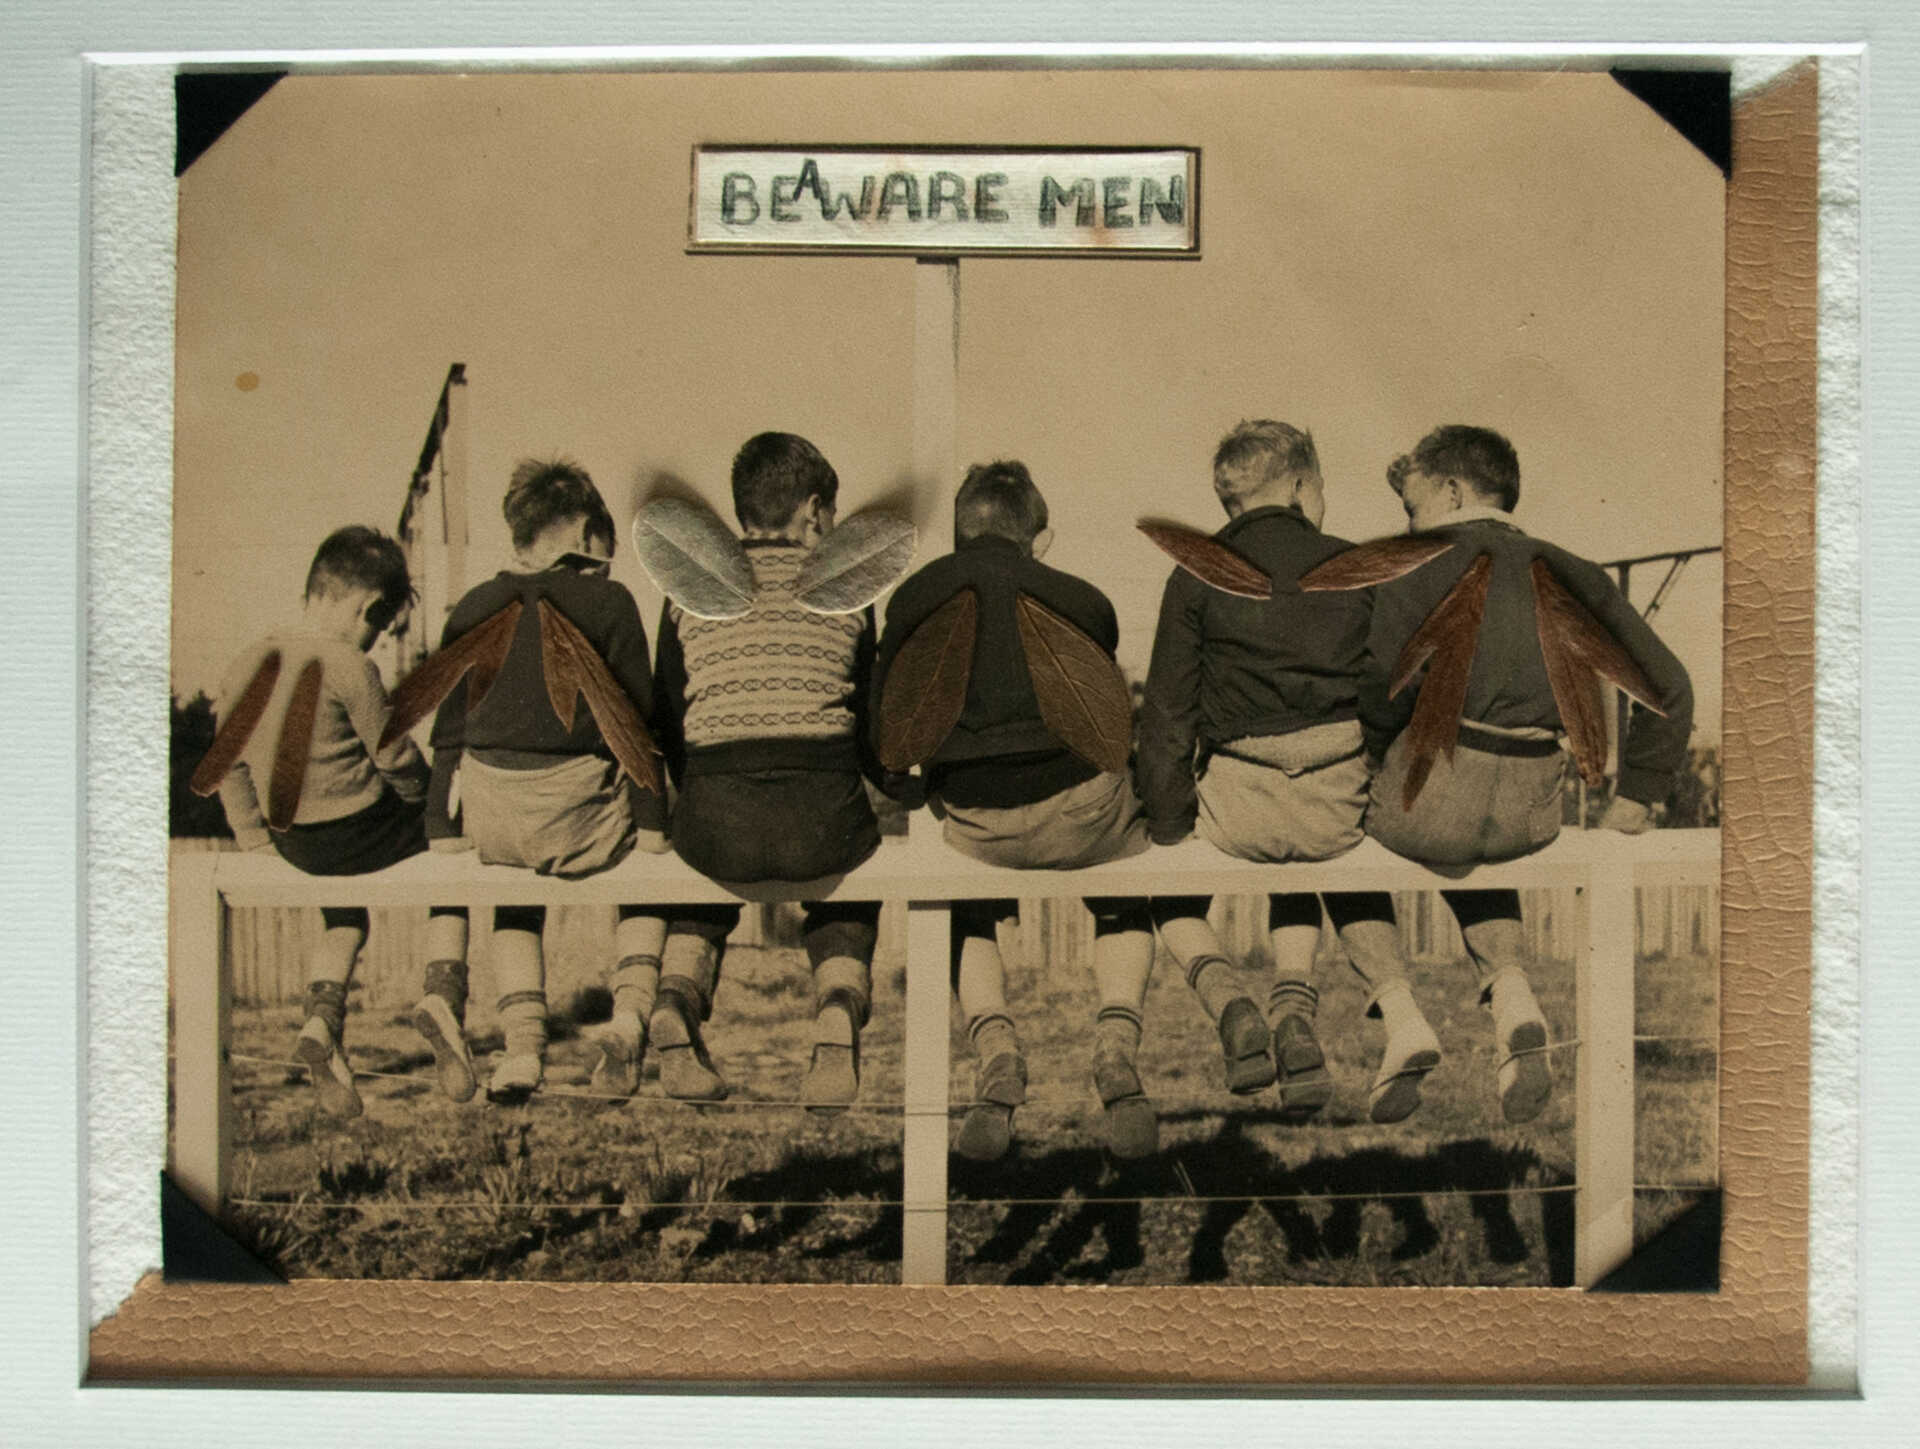 Collage work "Aware Men I" by Libby Bloxham. A sepia-toned vintage photograph shows a row of children—apparently young boys—seated on a fence, seen from behind. Small leaves are positioned at the shoulders of each figure, in pairs, so they look like wings. in the background, facing the figures and the viewer, is a sign saying "Beware Men", two which an additional "A" has been added to instead make "Be Aware Men".